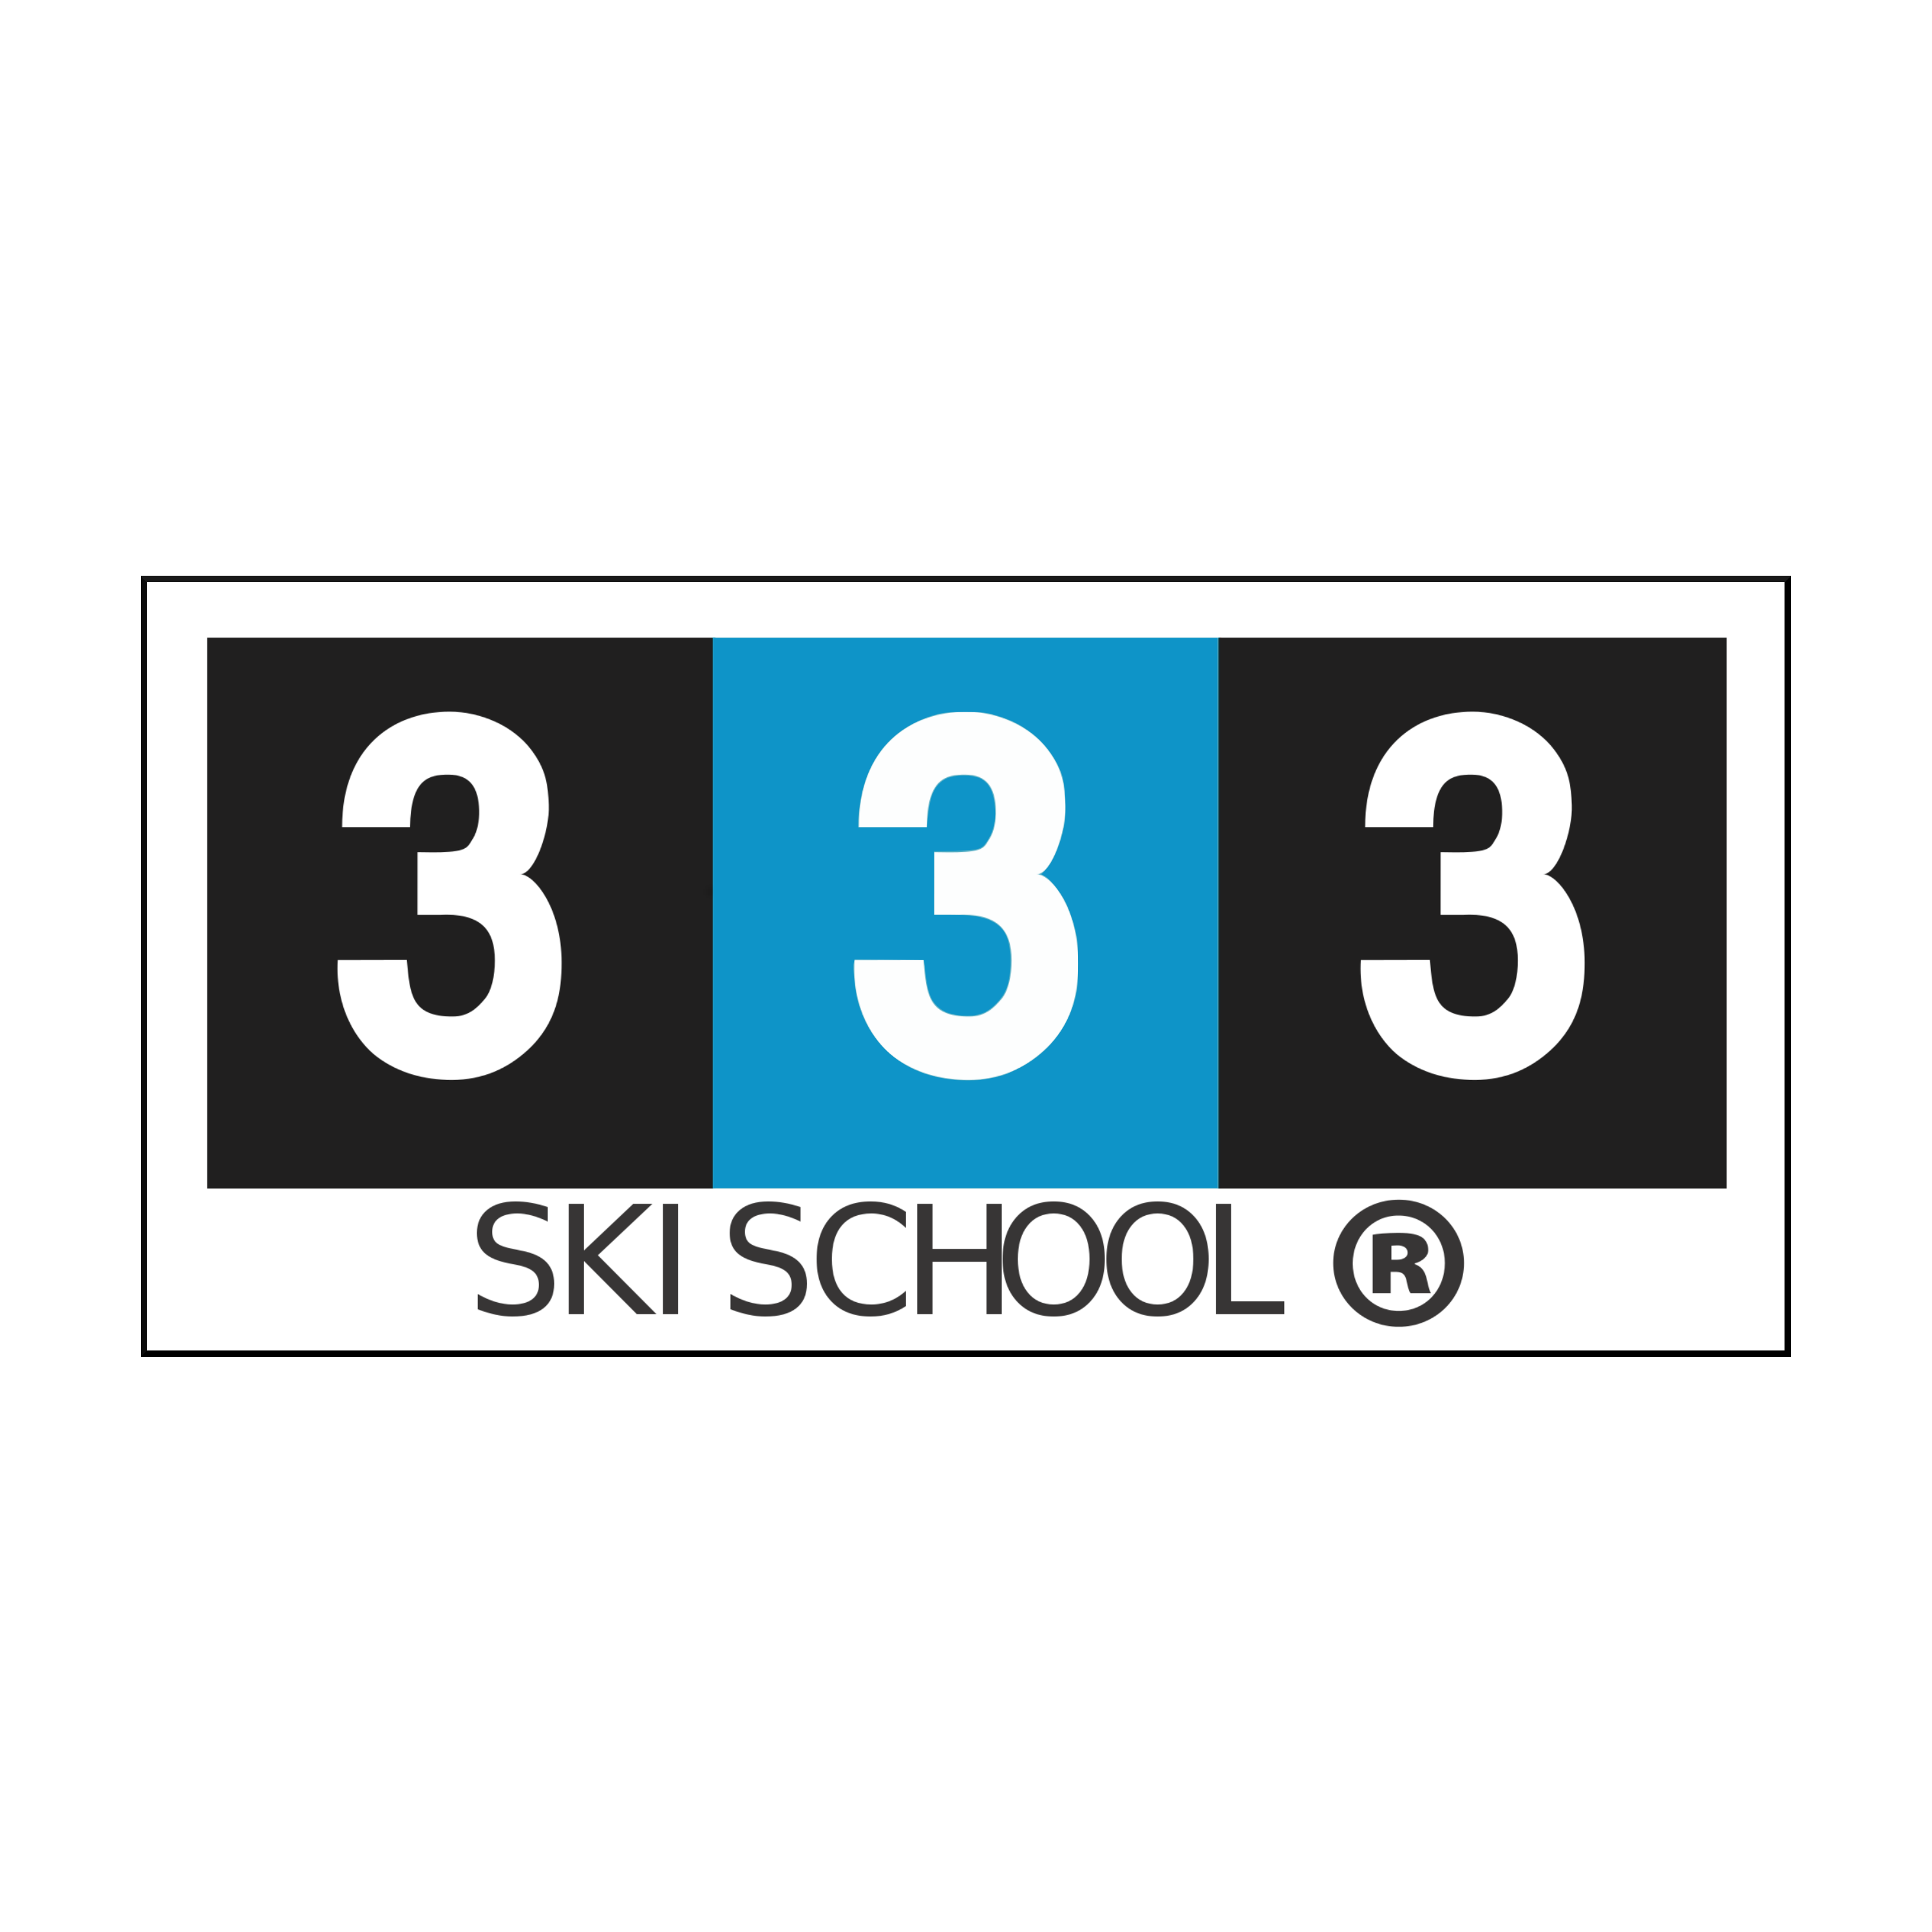 Private Ski Lessons for Adults of All Levels from ESI 333 Ski School Tignes & Val dIsère